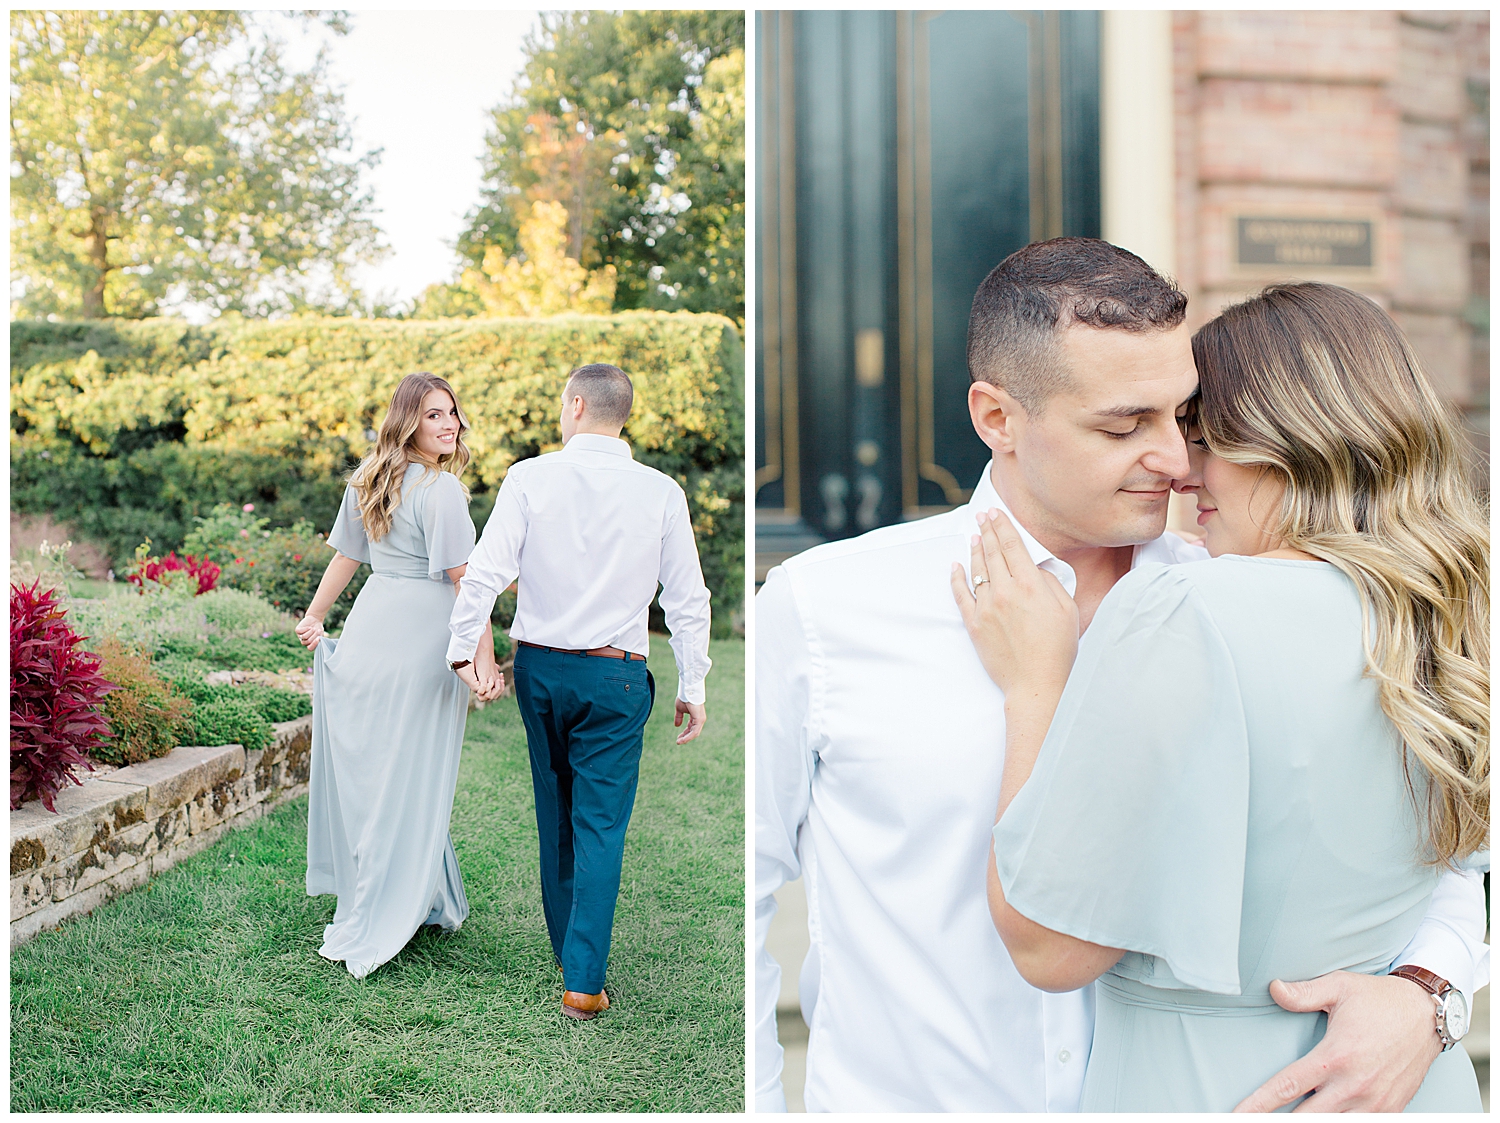 Jakab_Kingwood_Center_Gardens_Estate_Mansfield_Ohio_Engagement_Photography_Session_Kate_Mannella